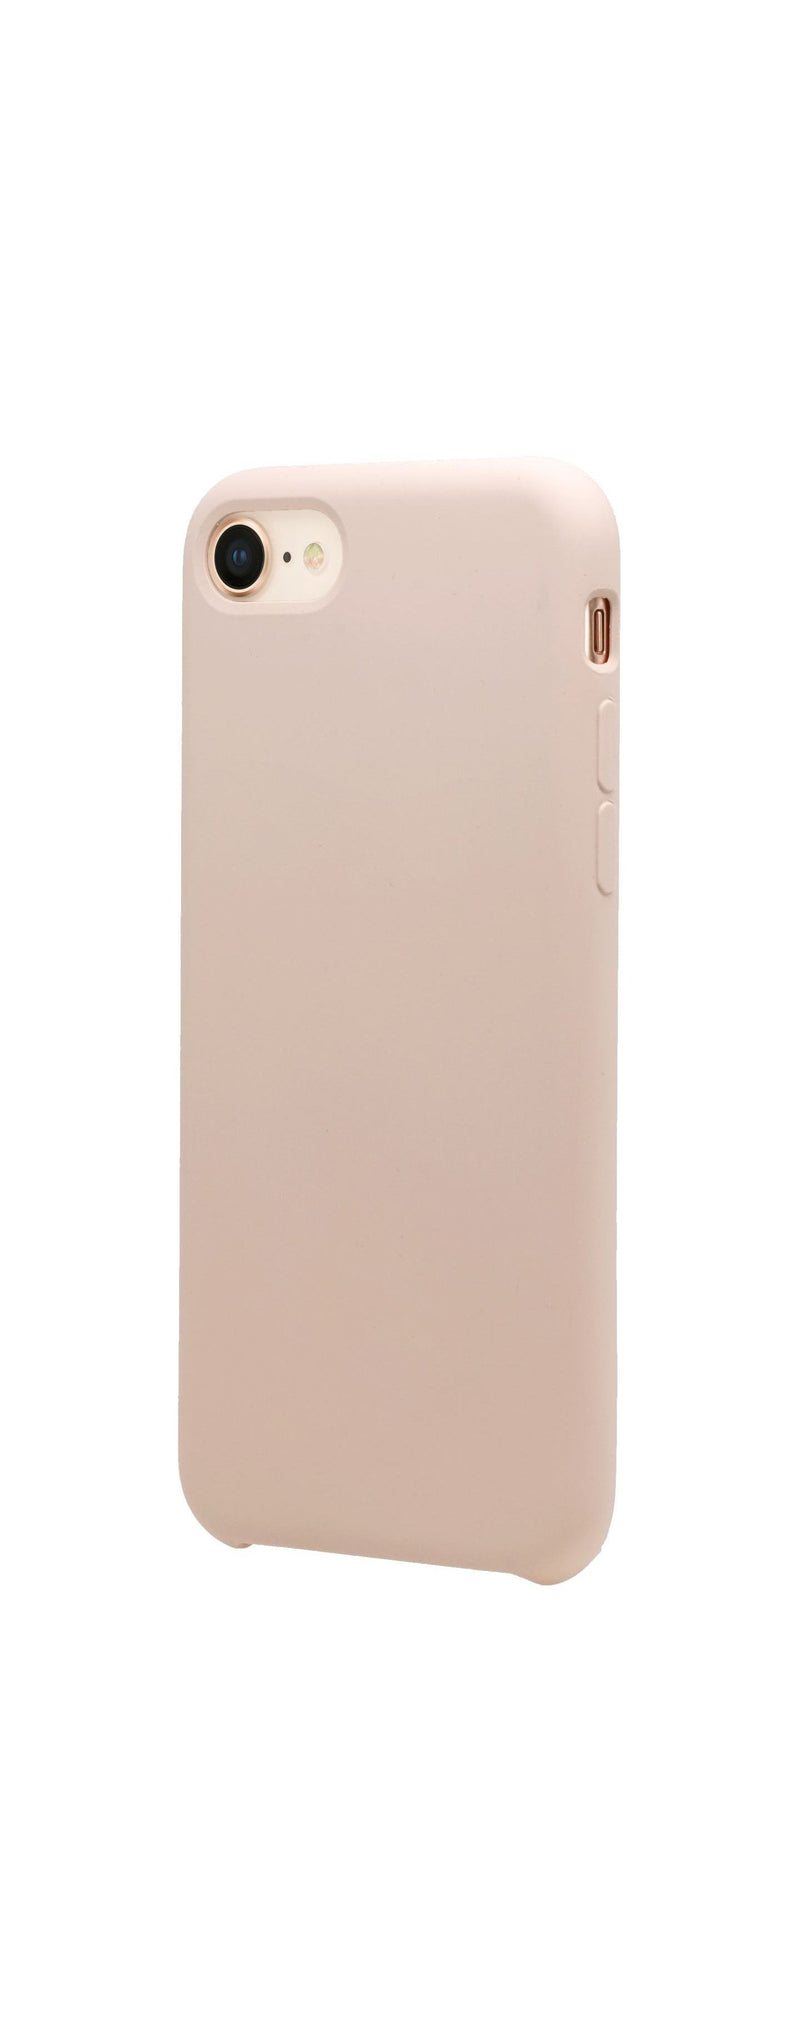 (Special Edition) Soft Silicone Gel Cover For Apple Iphone 7/8/Se 2020, Sand Pink - Cases - The Kase - The Kase The Bradery